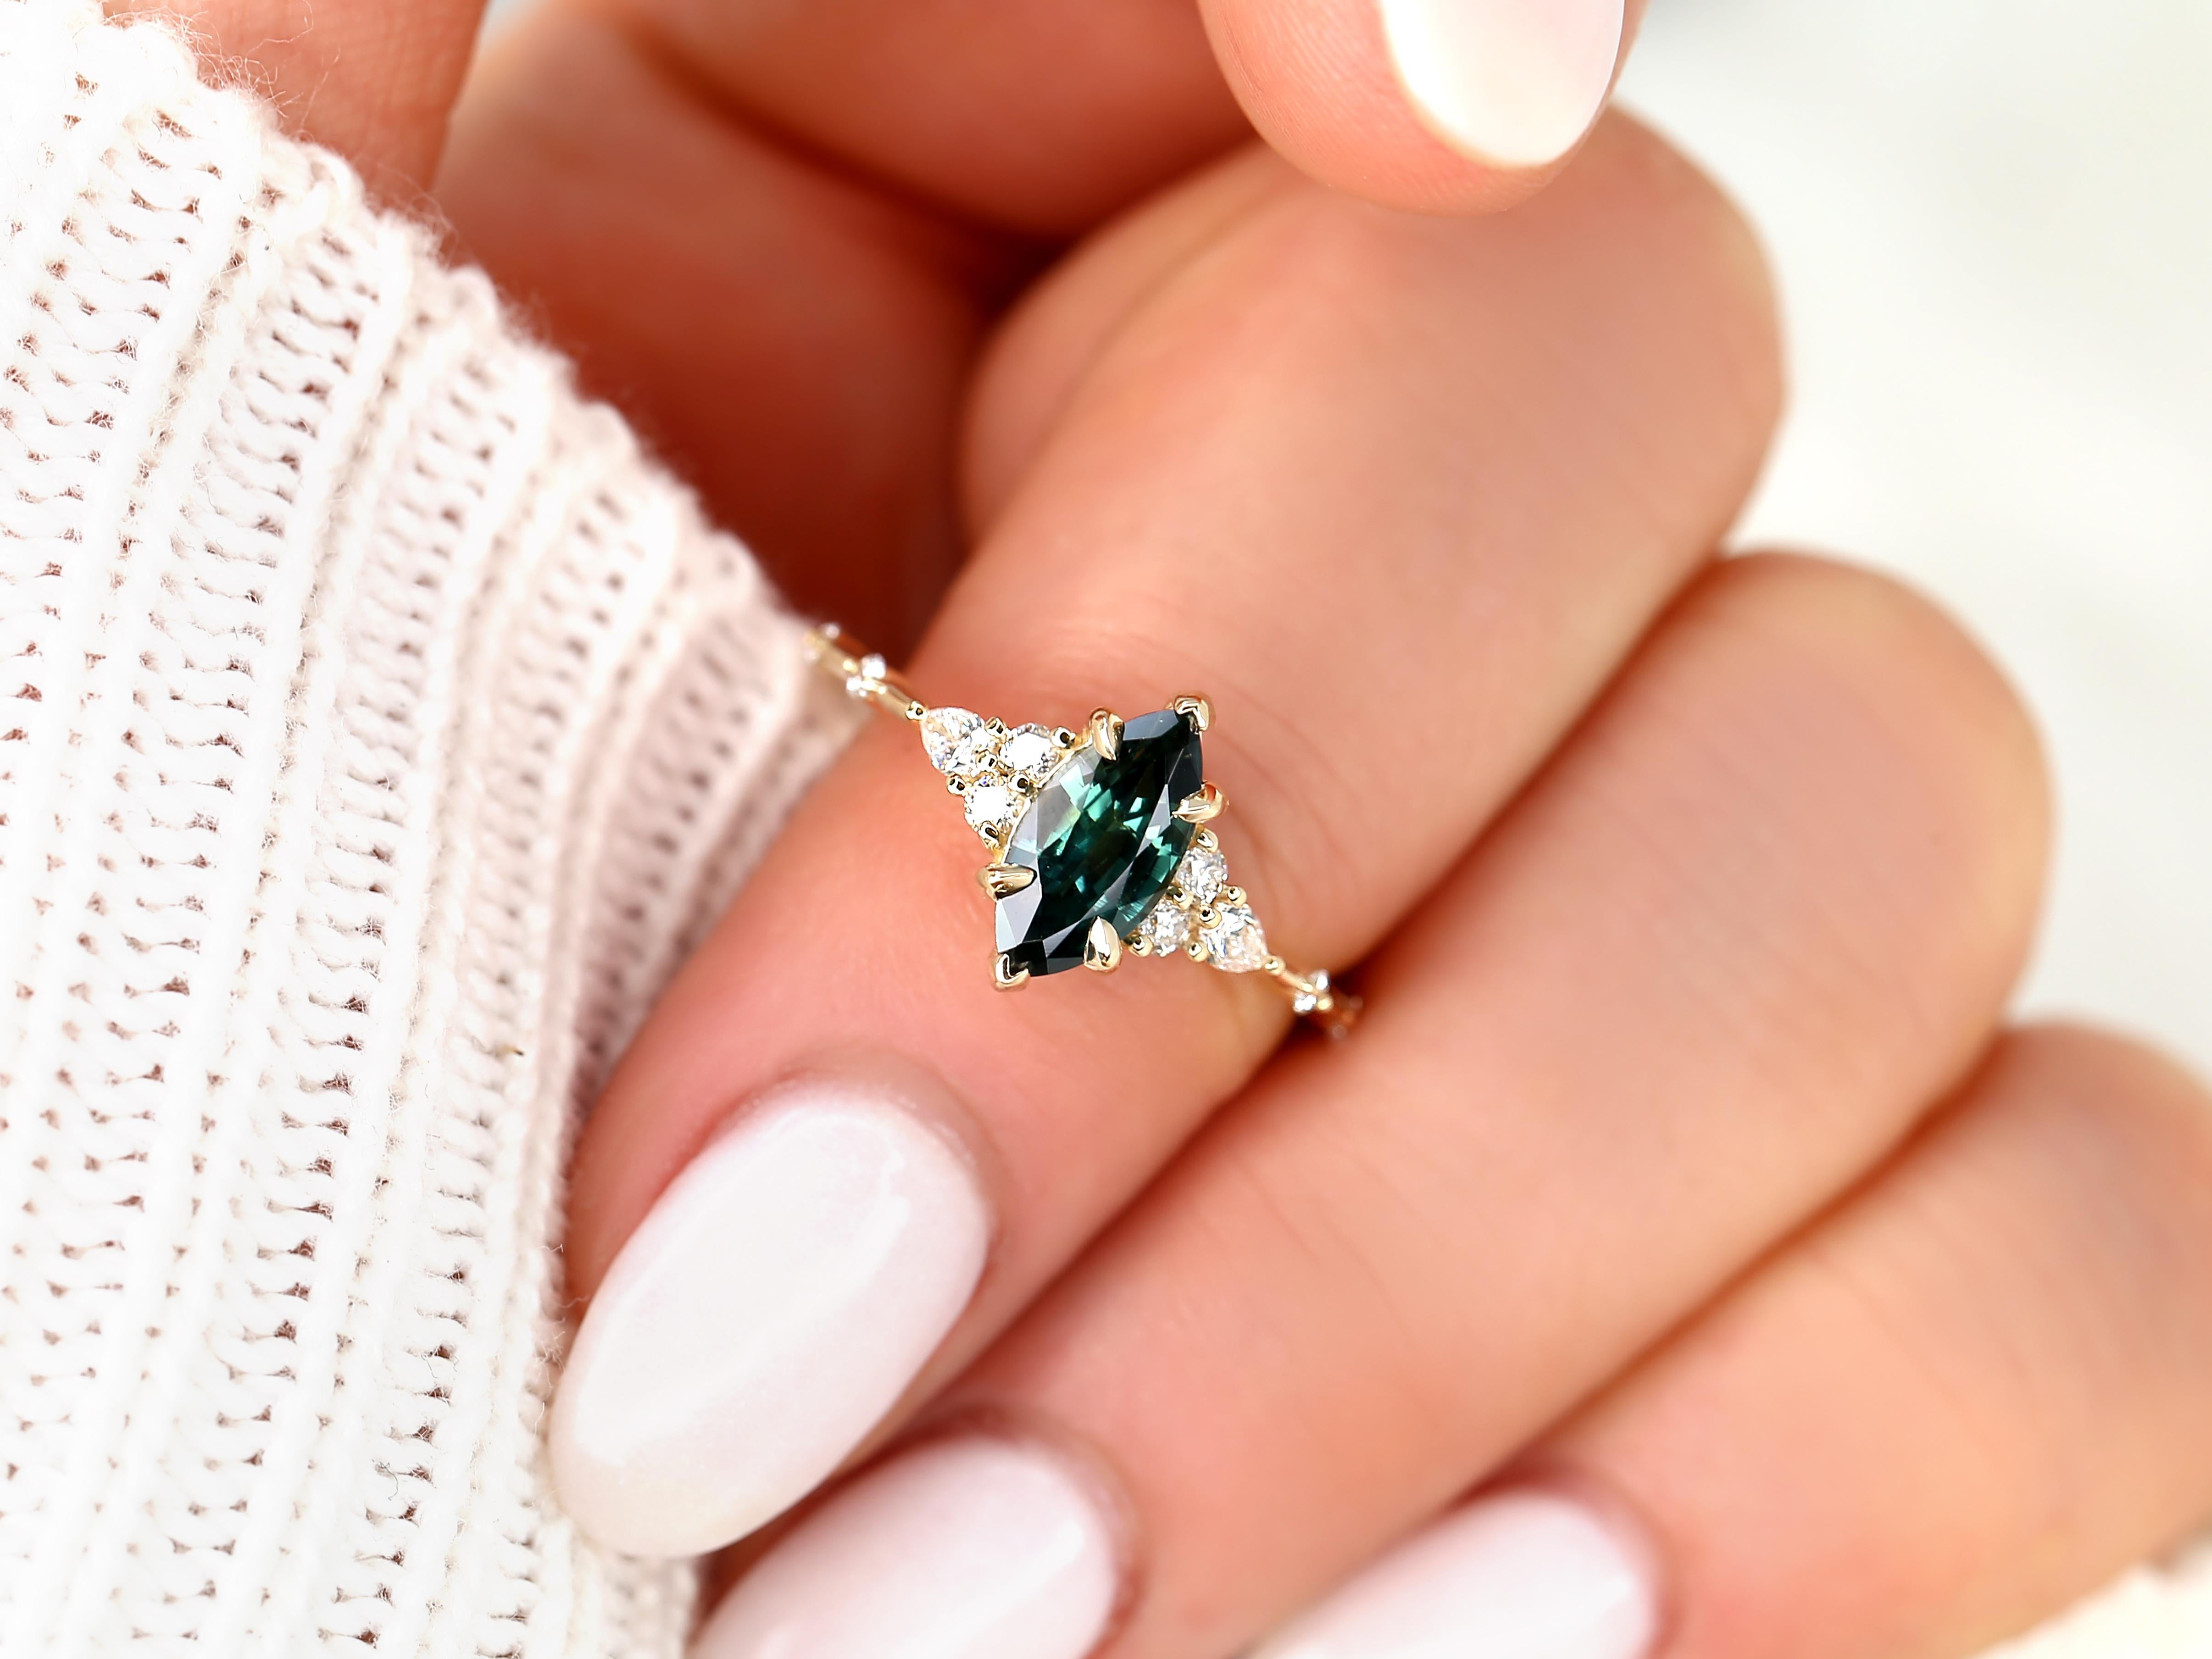 Explore our exquisite marquise teal sapphire cluster ring Astrid, featuring a stunning teal sapphire set in a dainty yet sophisticated 14kt gold design, accented with natural diamonds. Discover timeless elegance in every detail.

Details of